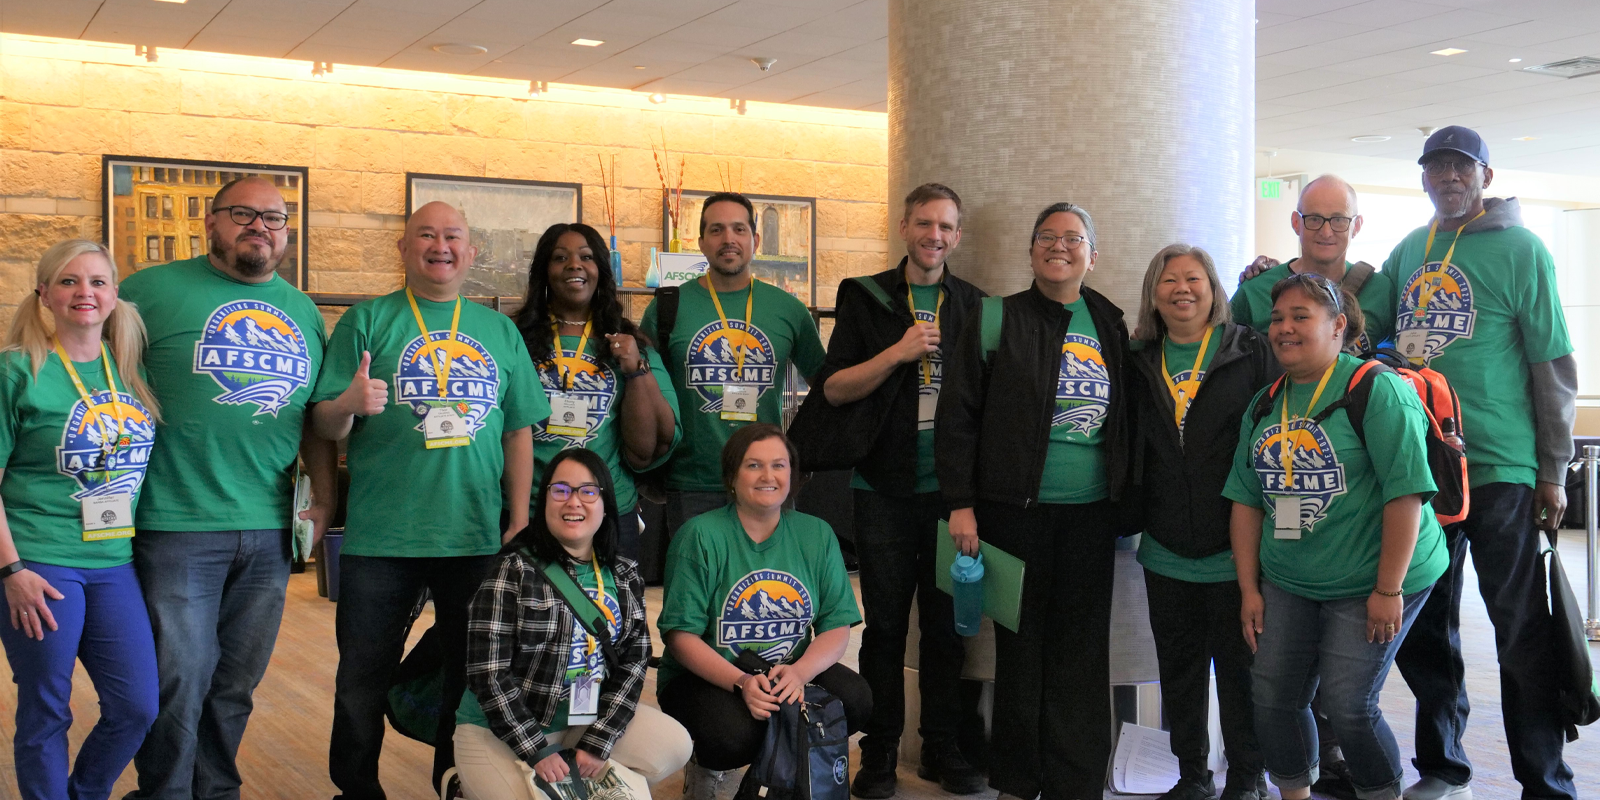 AFSCME volunteer member organizers bring unique perspectives to expanding union